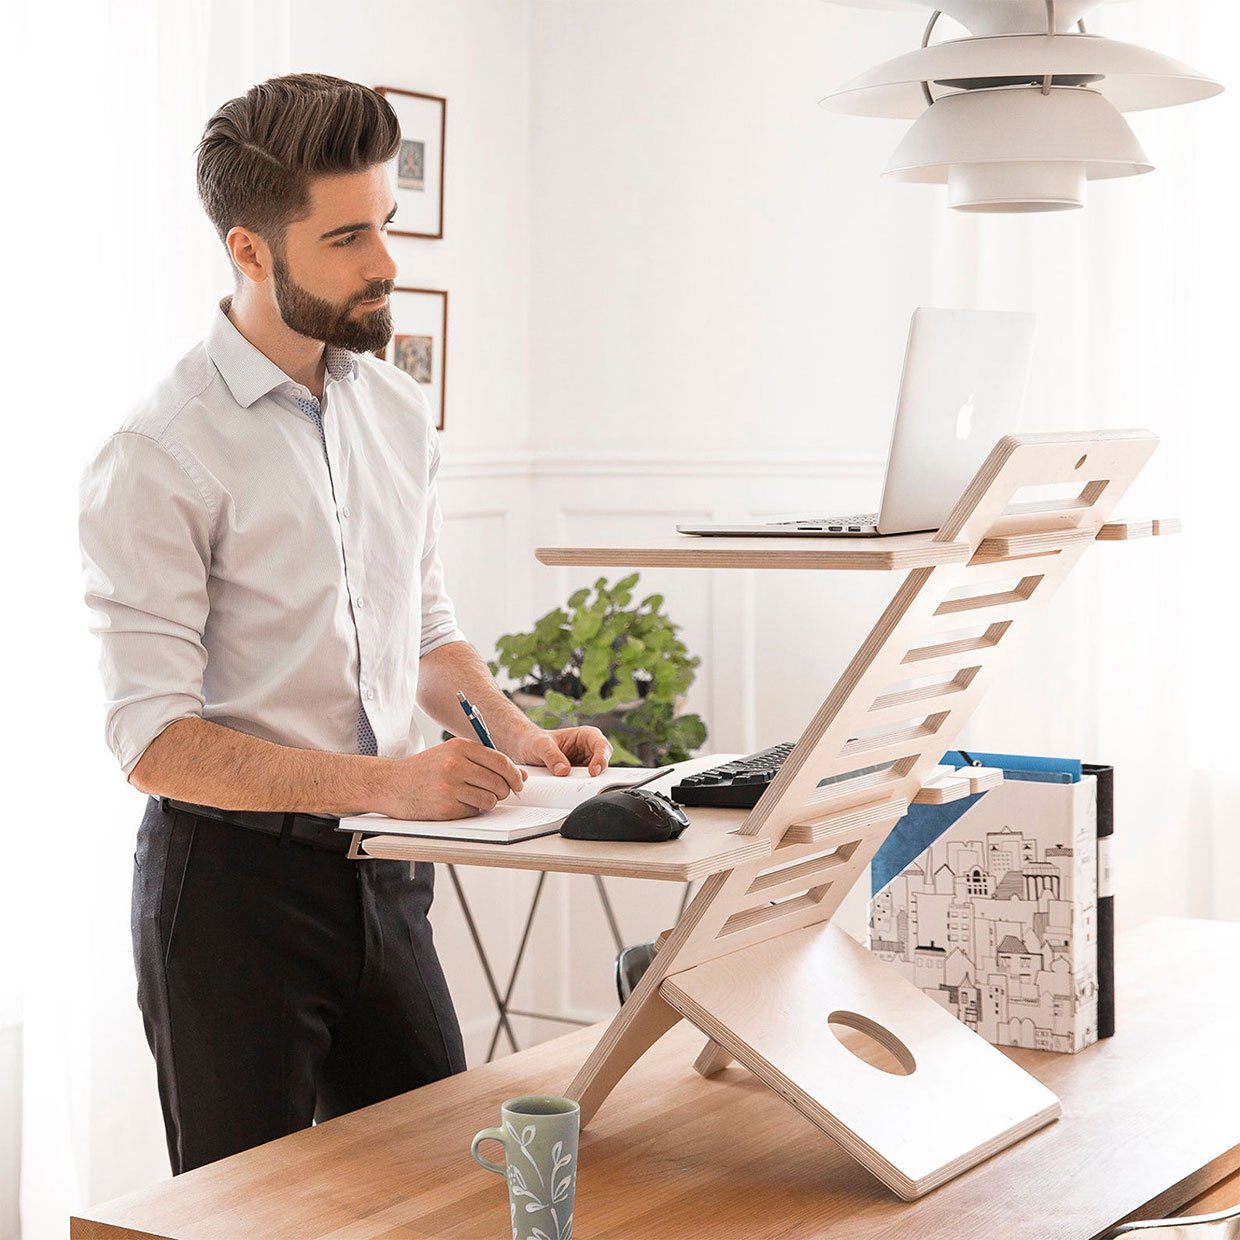 The Jumbo DeskStand Converts Any Desk Into a Two Tier Standing Desk